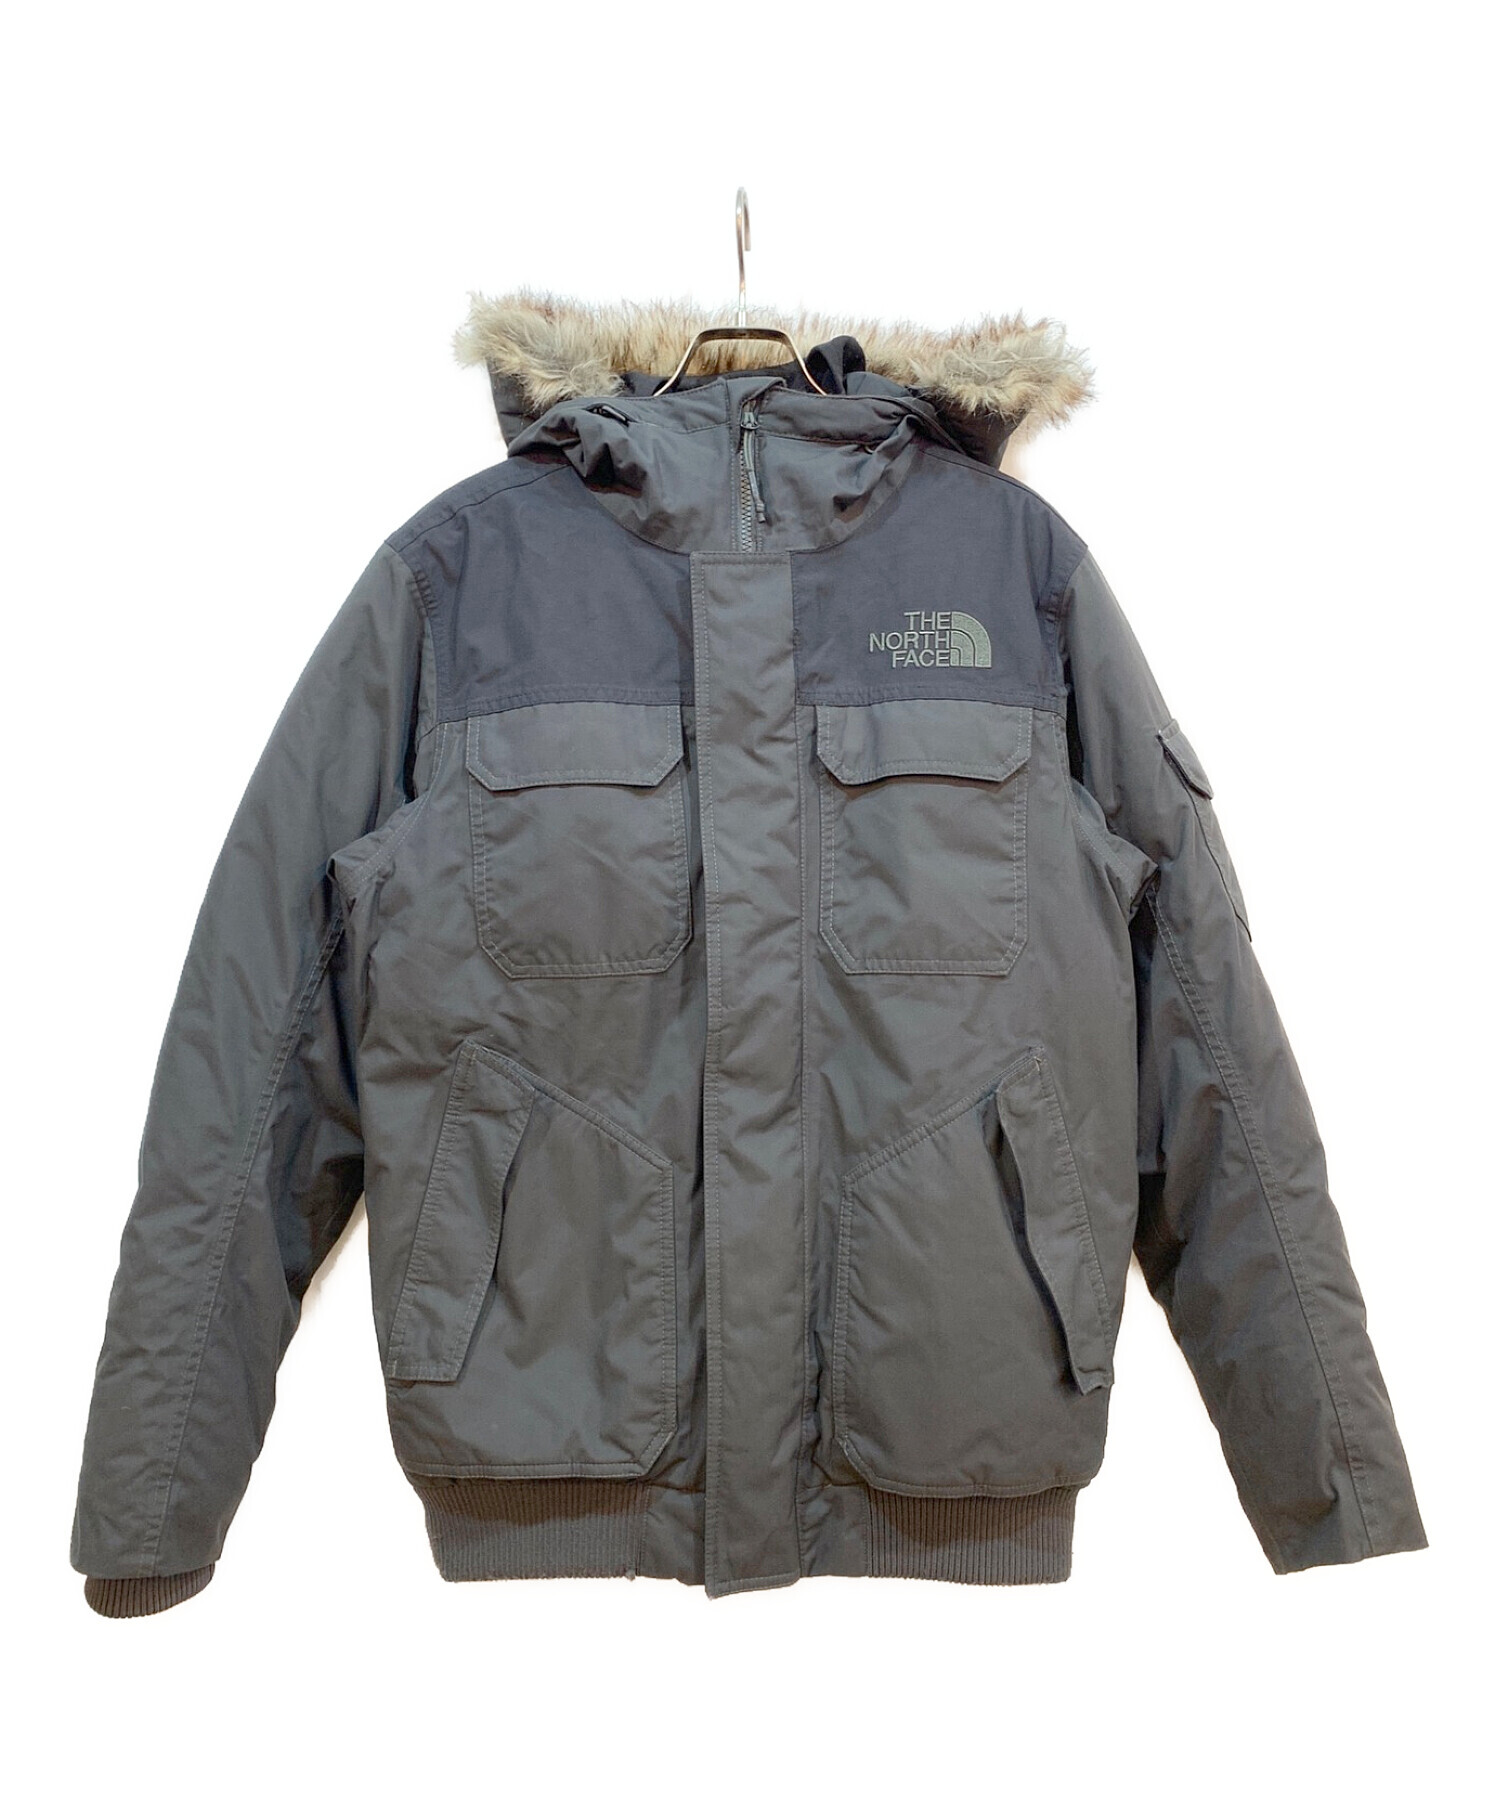 THE NORTH FACE ゴッサム